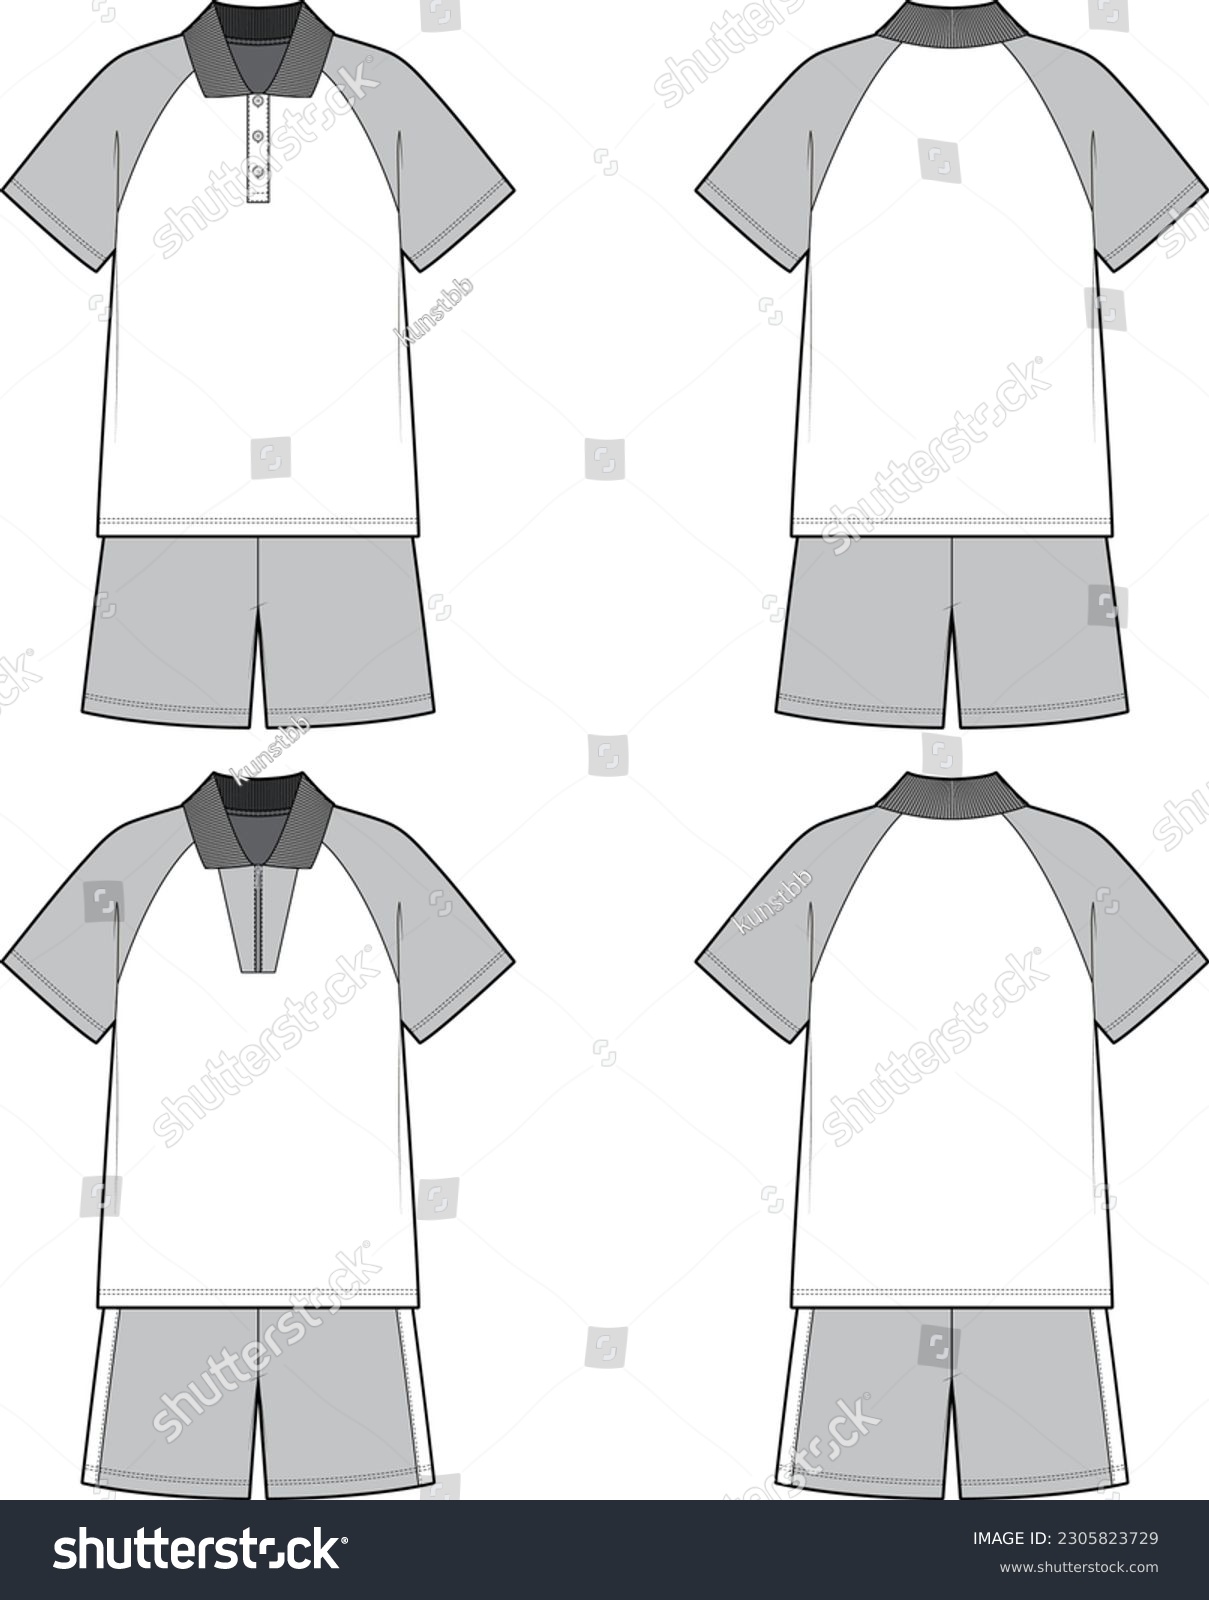 SVG of Technical sketch of unisex tracksuit set. Front and back sketch mock up. Collar sweatshirt with half placket and shorts. T-shirt, sweatpants. Training suit. Short sleeve tops, easy pull on bottoms. svg